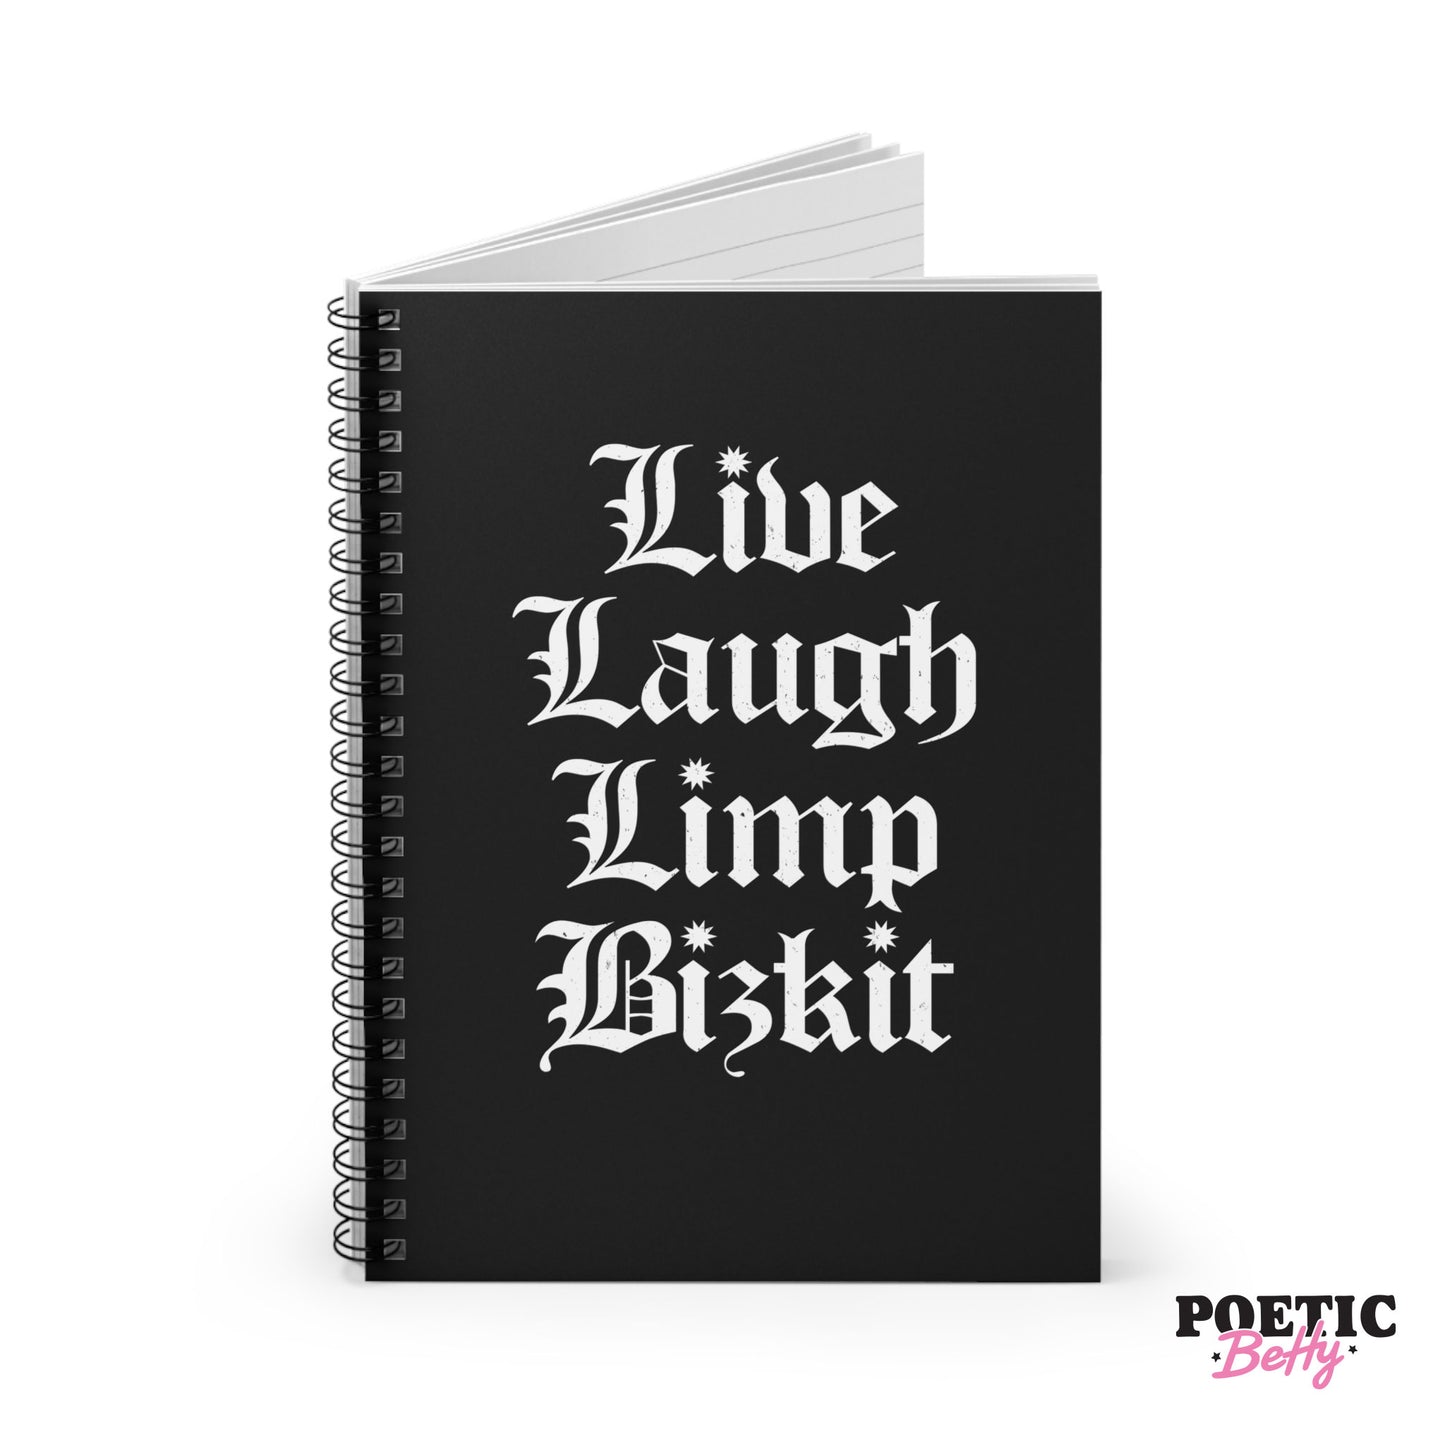 Live Laugh L*mp Bizkit Parody Old School Notebook 60 Pages Lined Spiral Bound